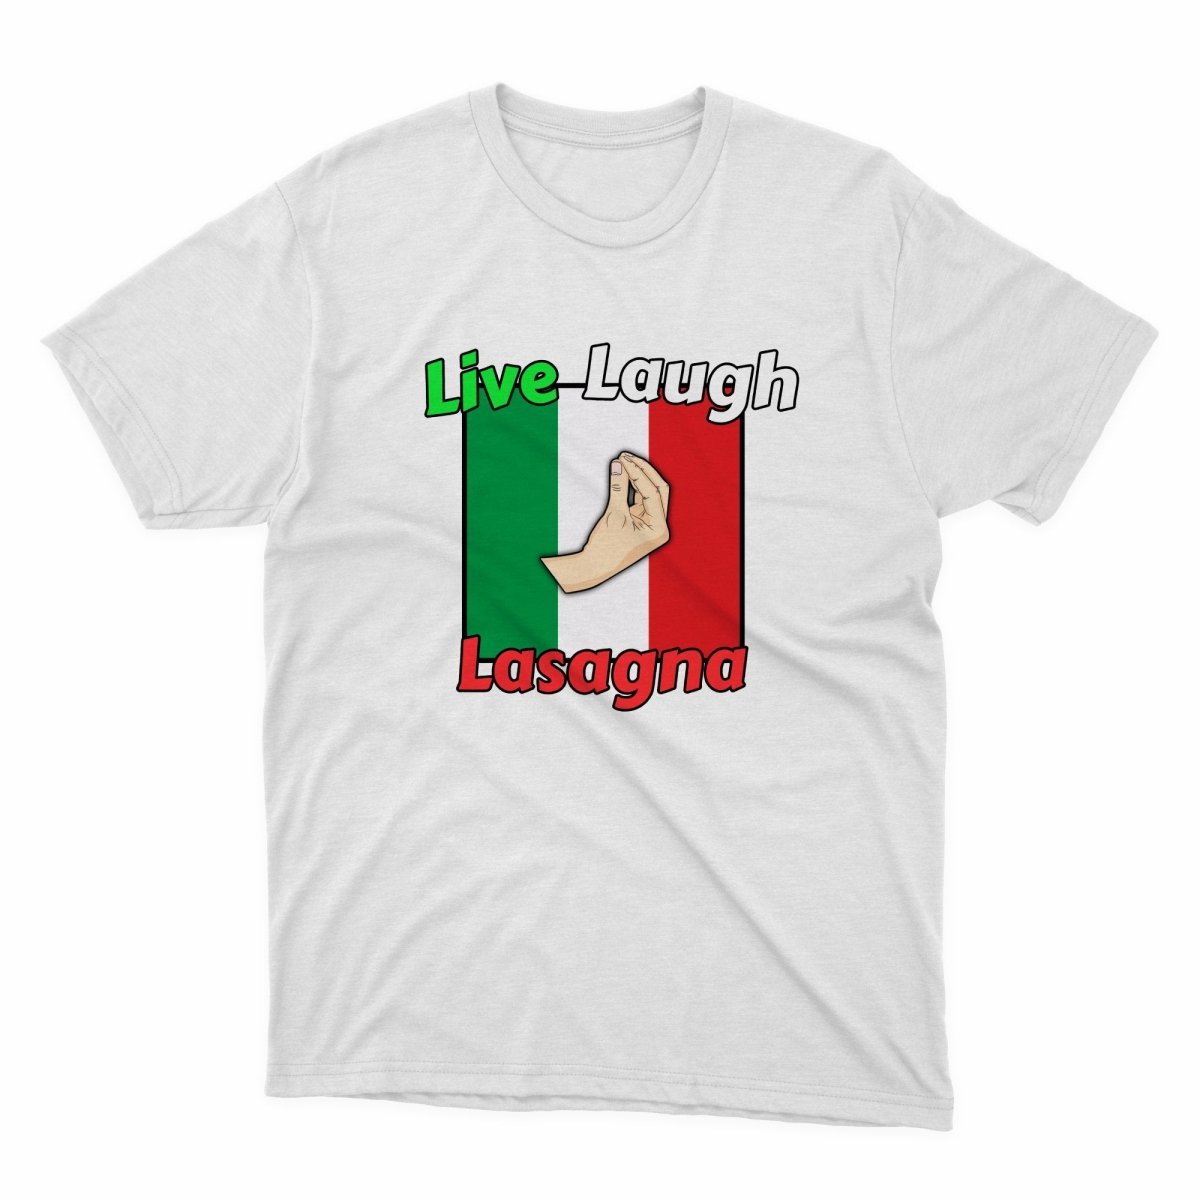 Live Laugh Lasagna Shirt - stickerbullLive Laugh Lasagna ShirtShirtsPrintifystickerbull21441486300412938535WhiteSa white t - shirt with the words live laugh and a hand holding a flag